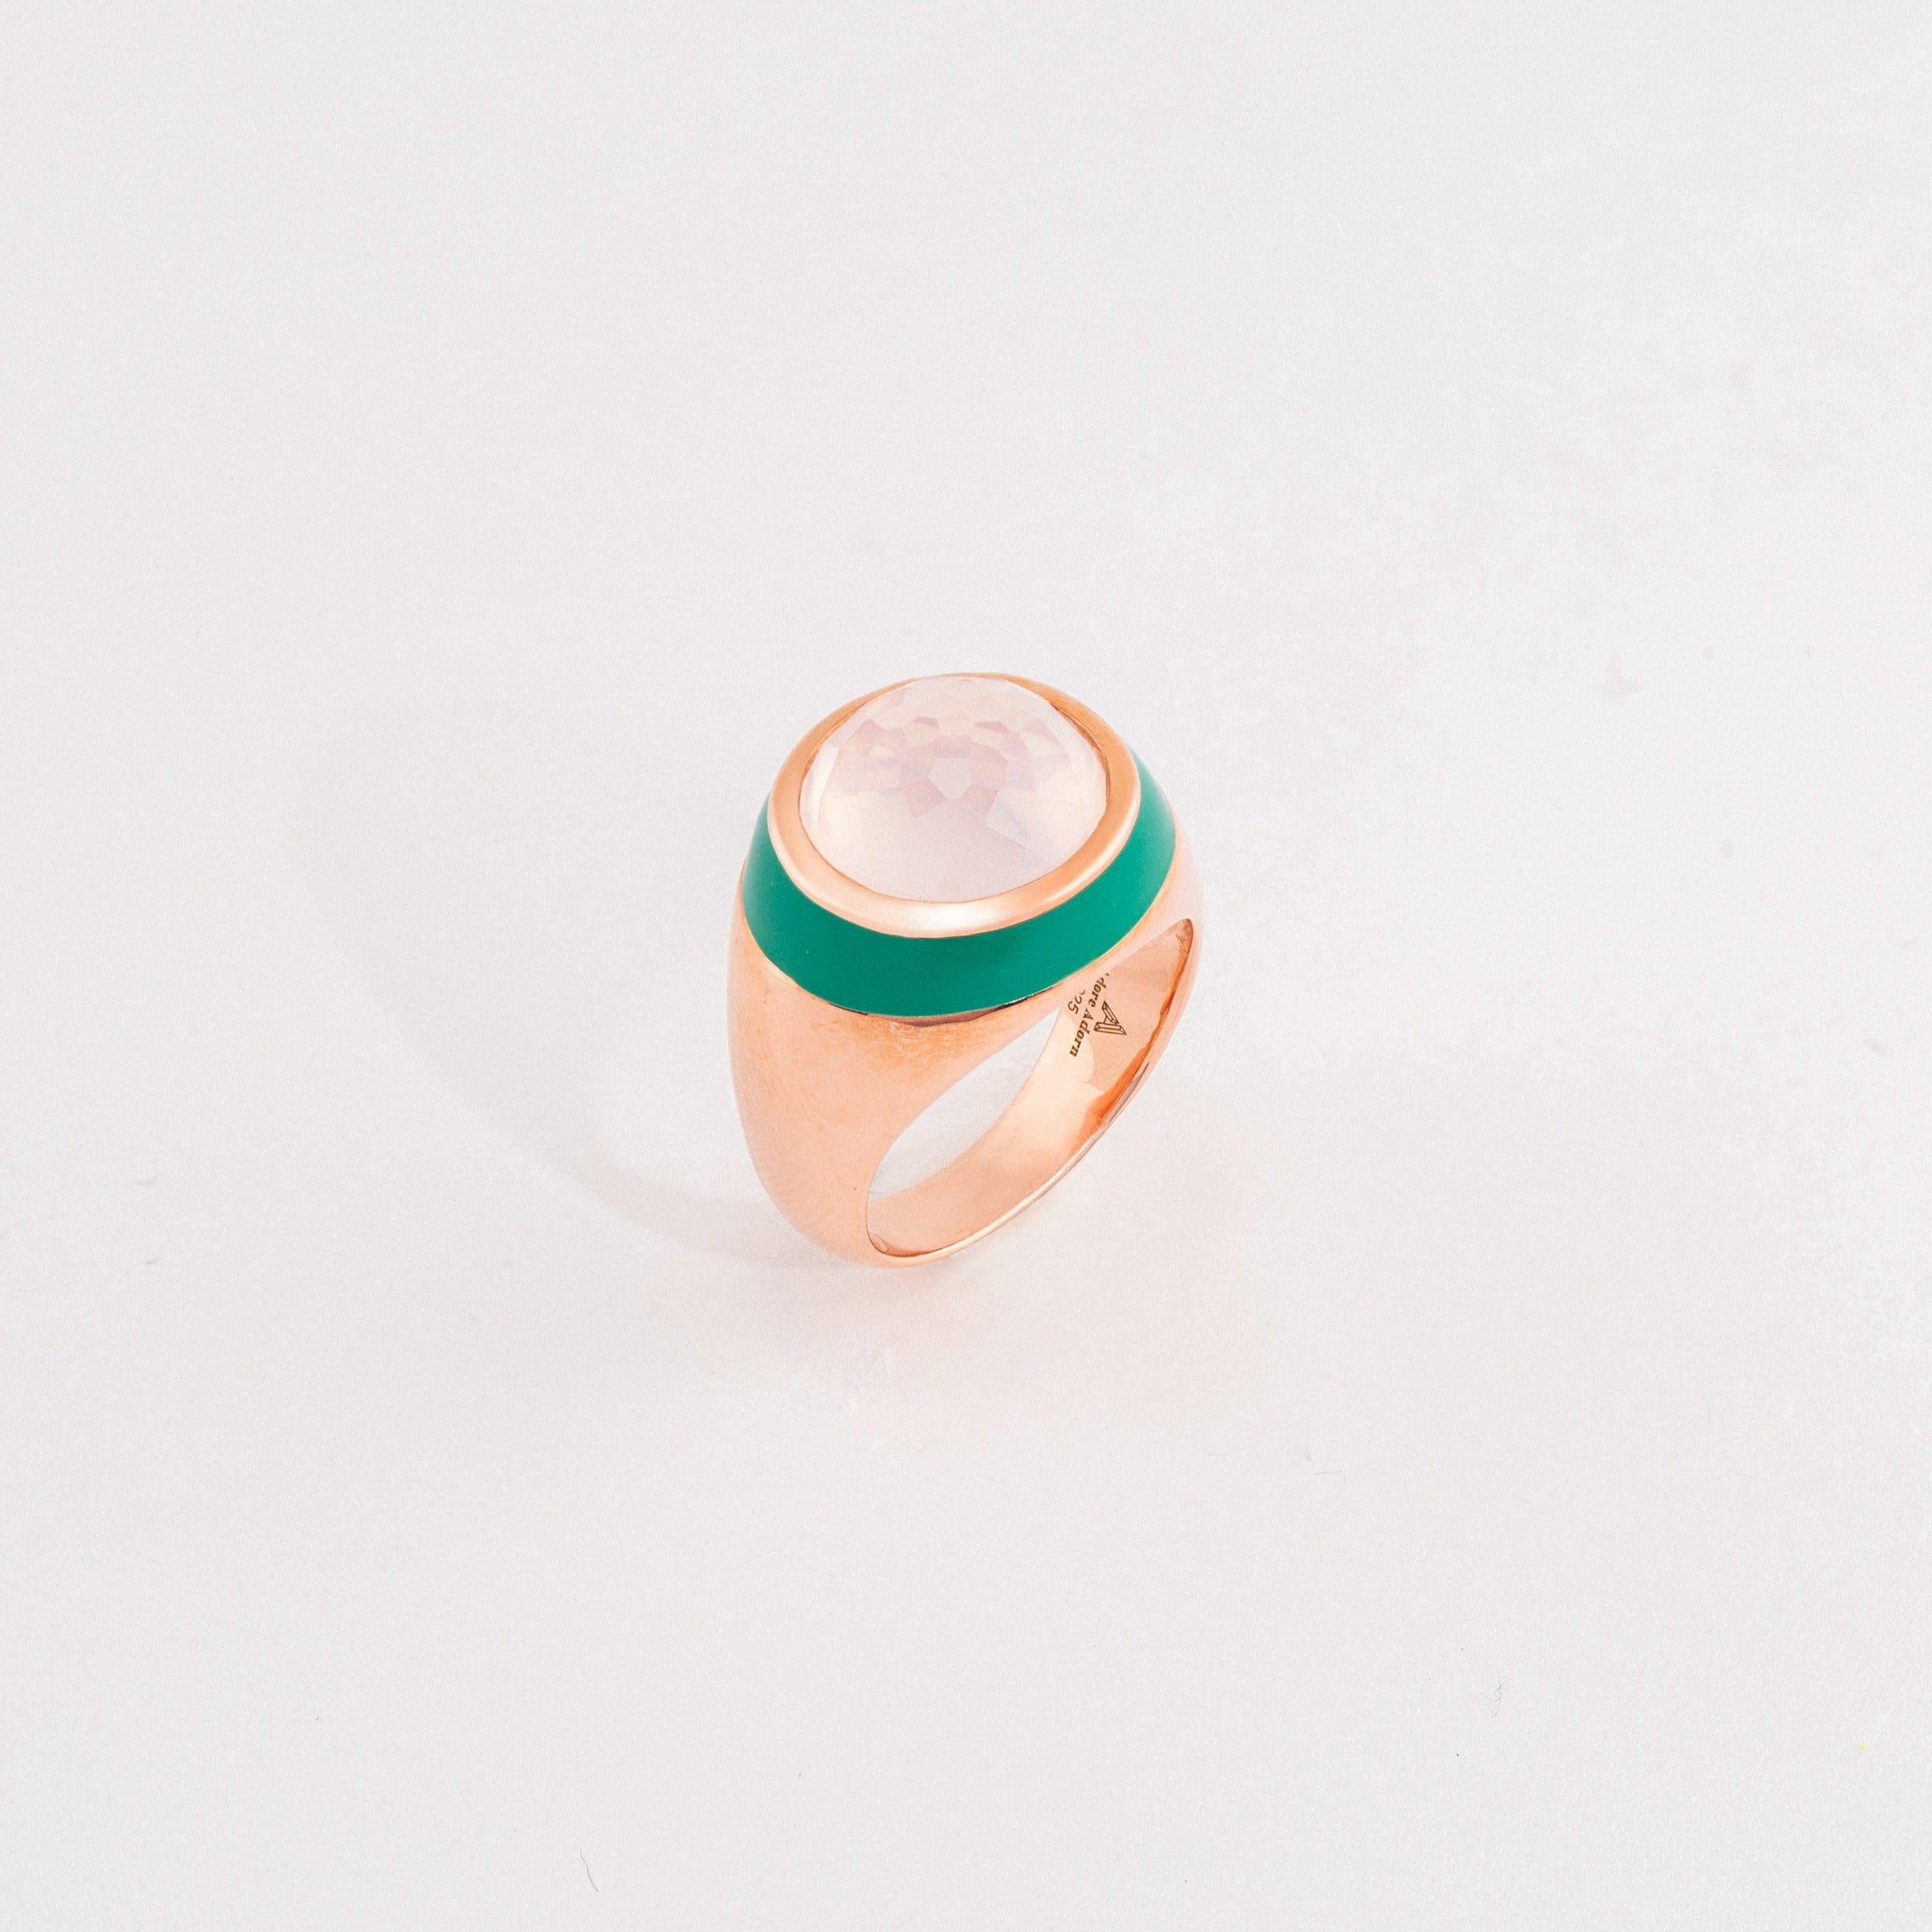 Our enamel rings are color-blocked with whimsy and fun. Cocktail rings are normally very serious, but we use color and various materials and gemstone cuts to bring excitement to the otherwise mundane.

Wear it alone or mix it up in a colorful clash,